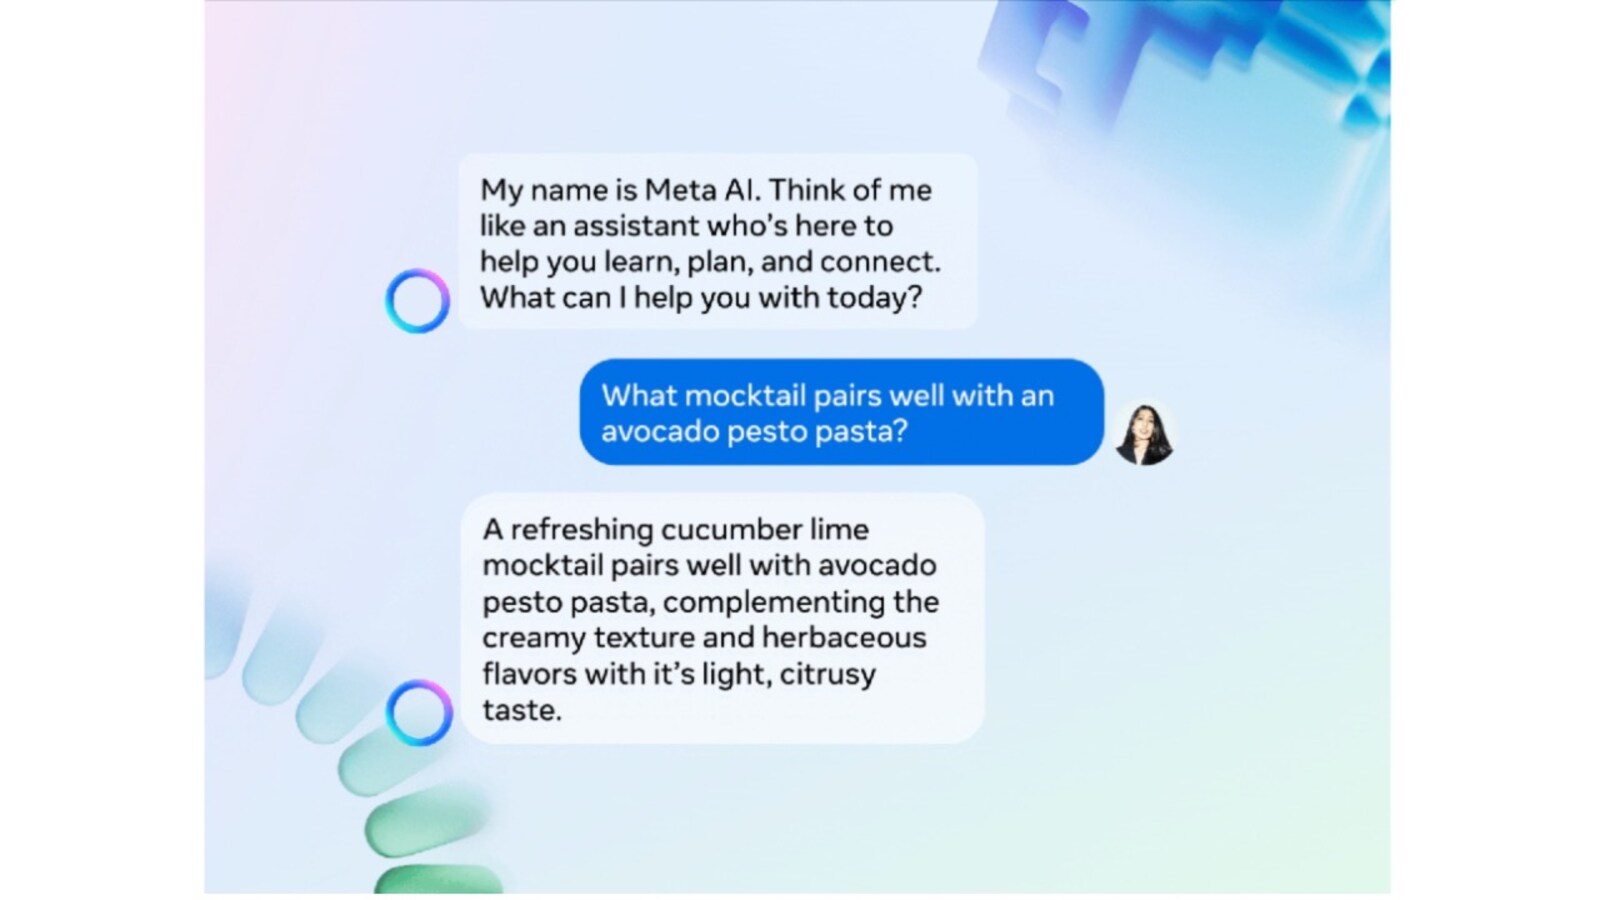 How to use Meta AI on WhatsApp, Instagram: Step-by-step guide